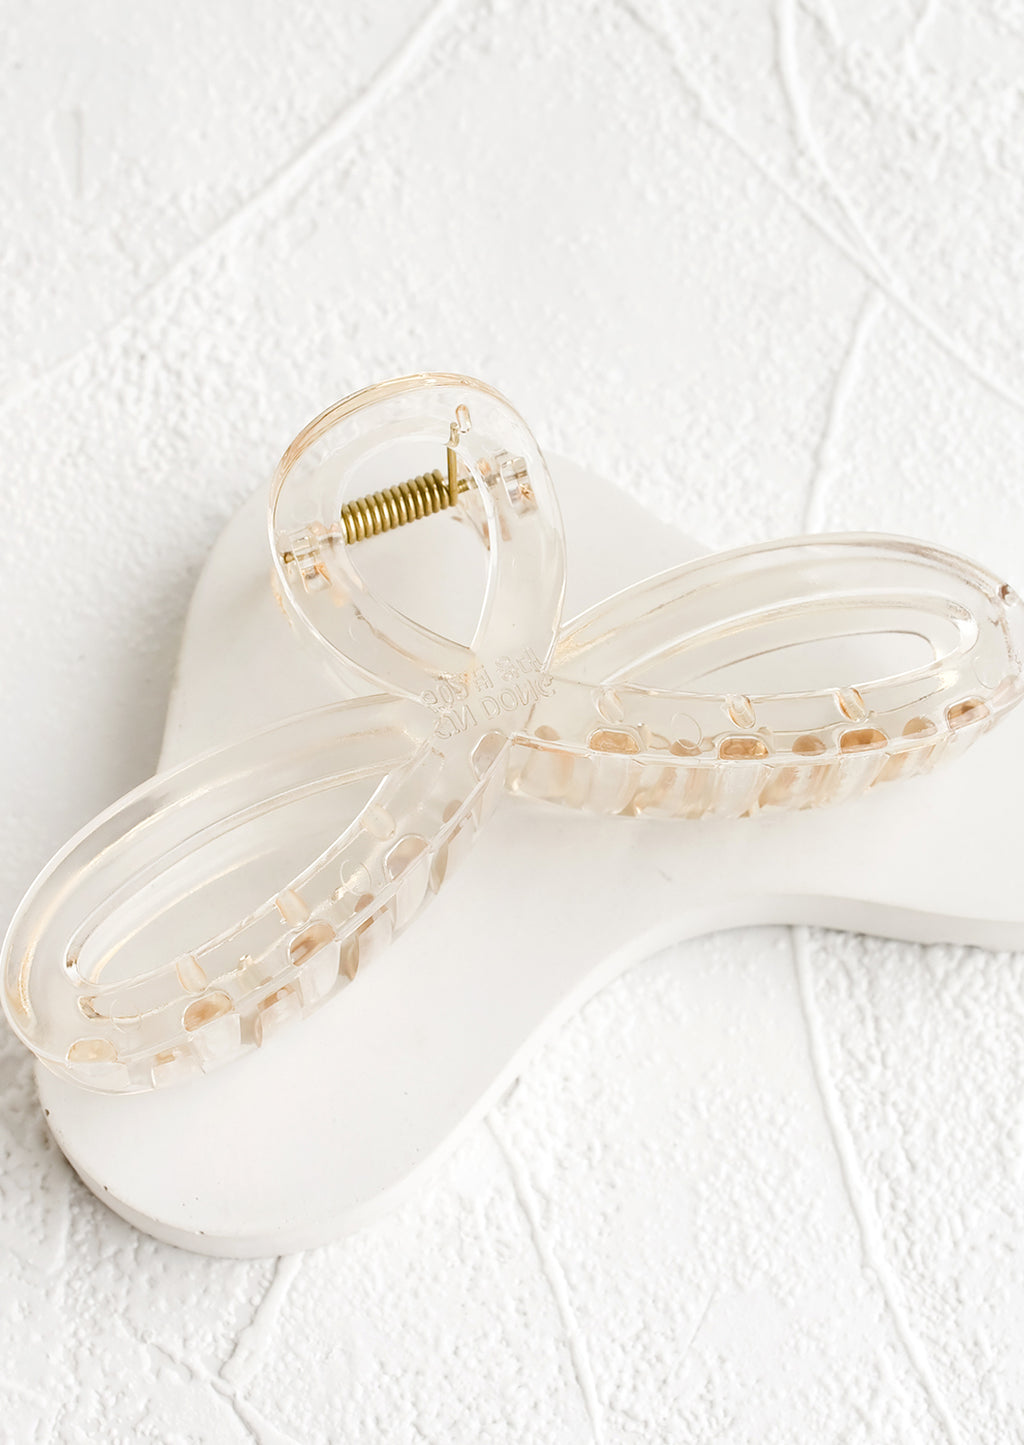 Pale Honey: A curvy hair clip with knotted loop design in shiny transparent pale brown.